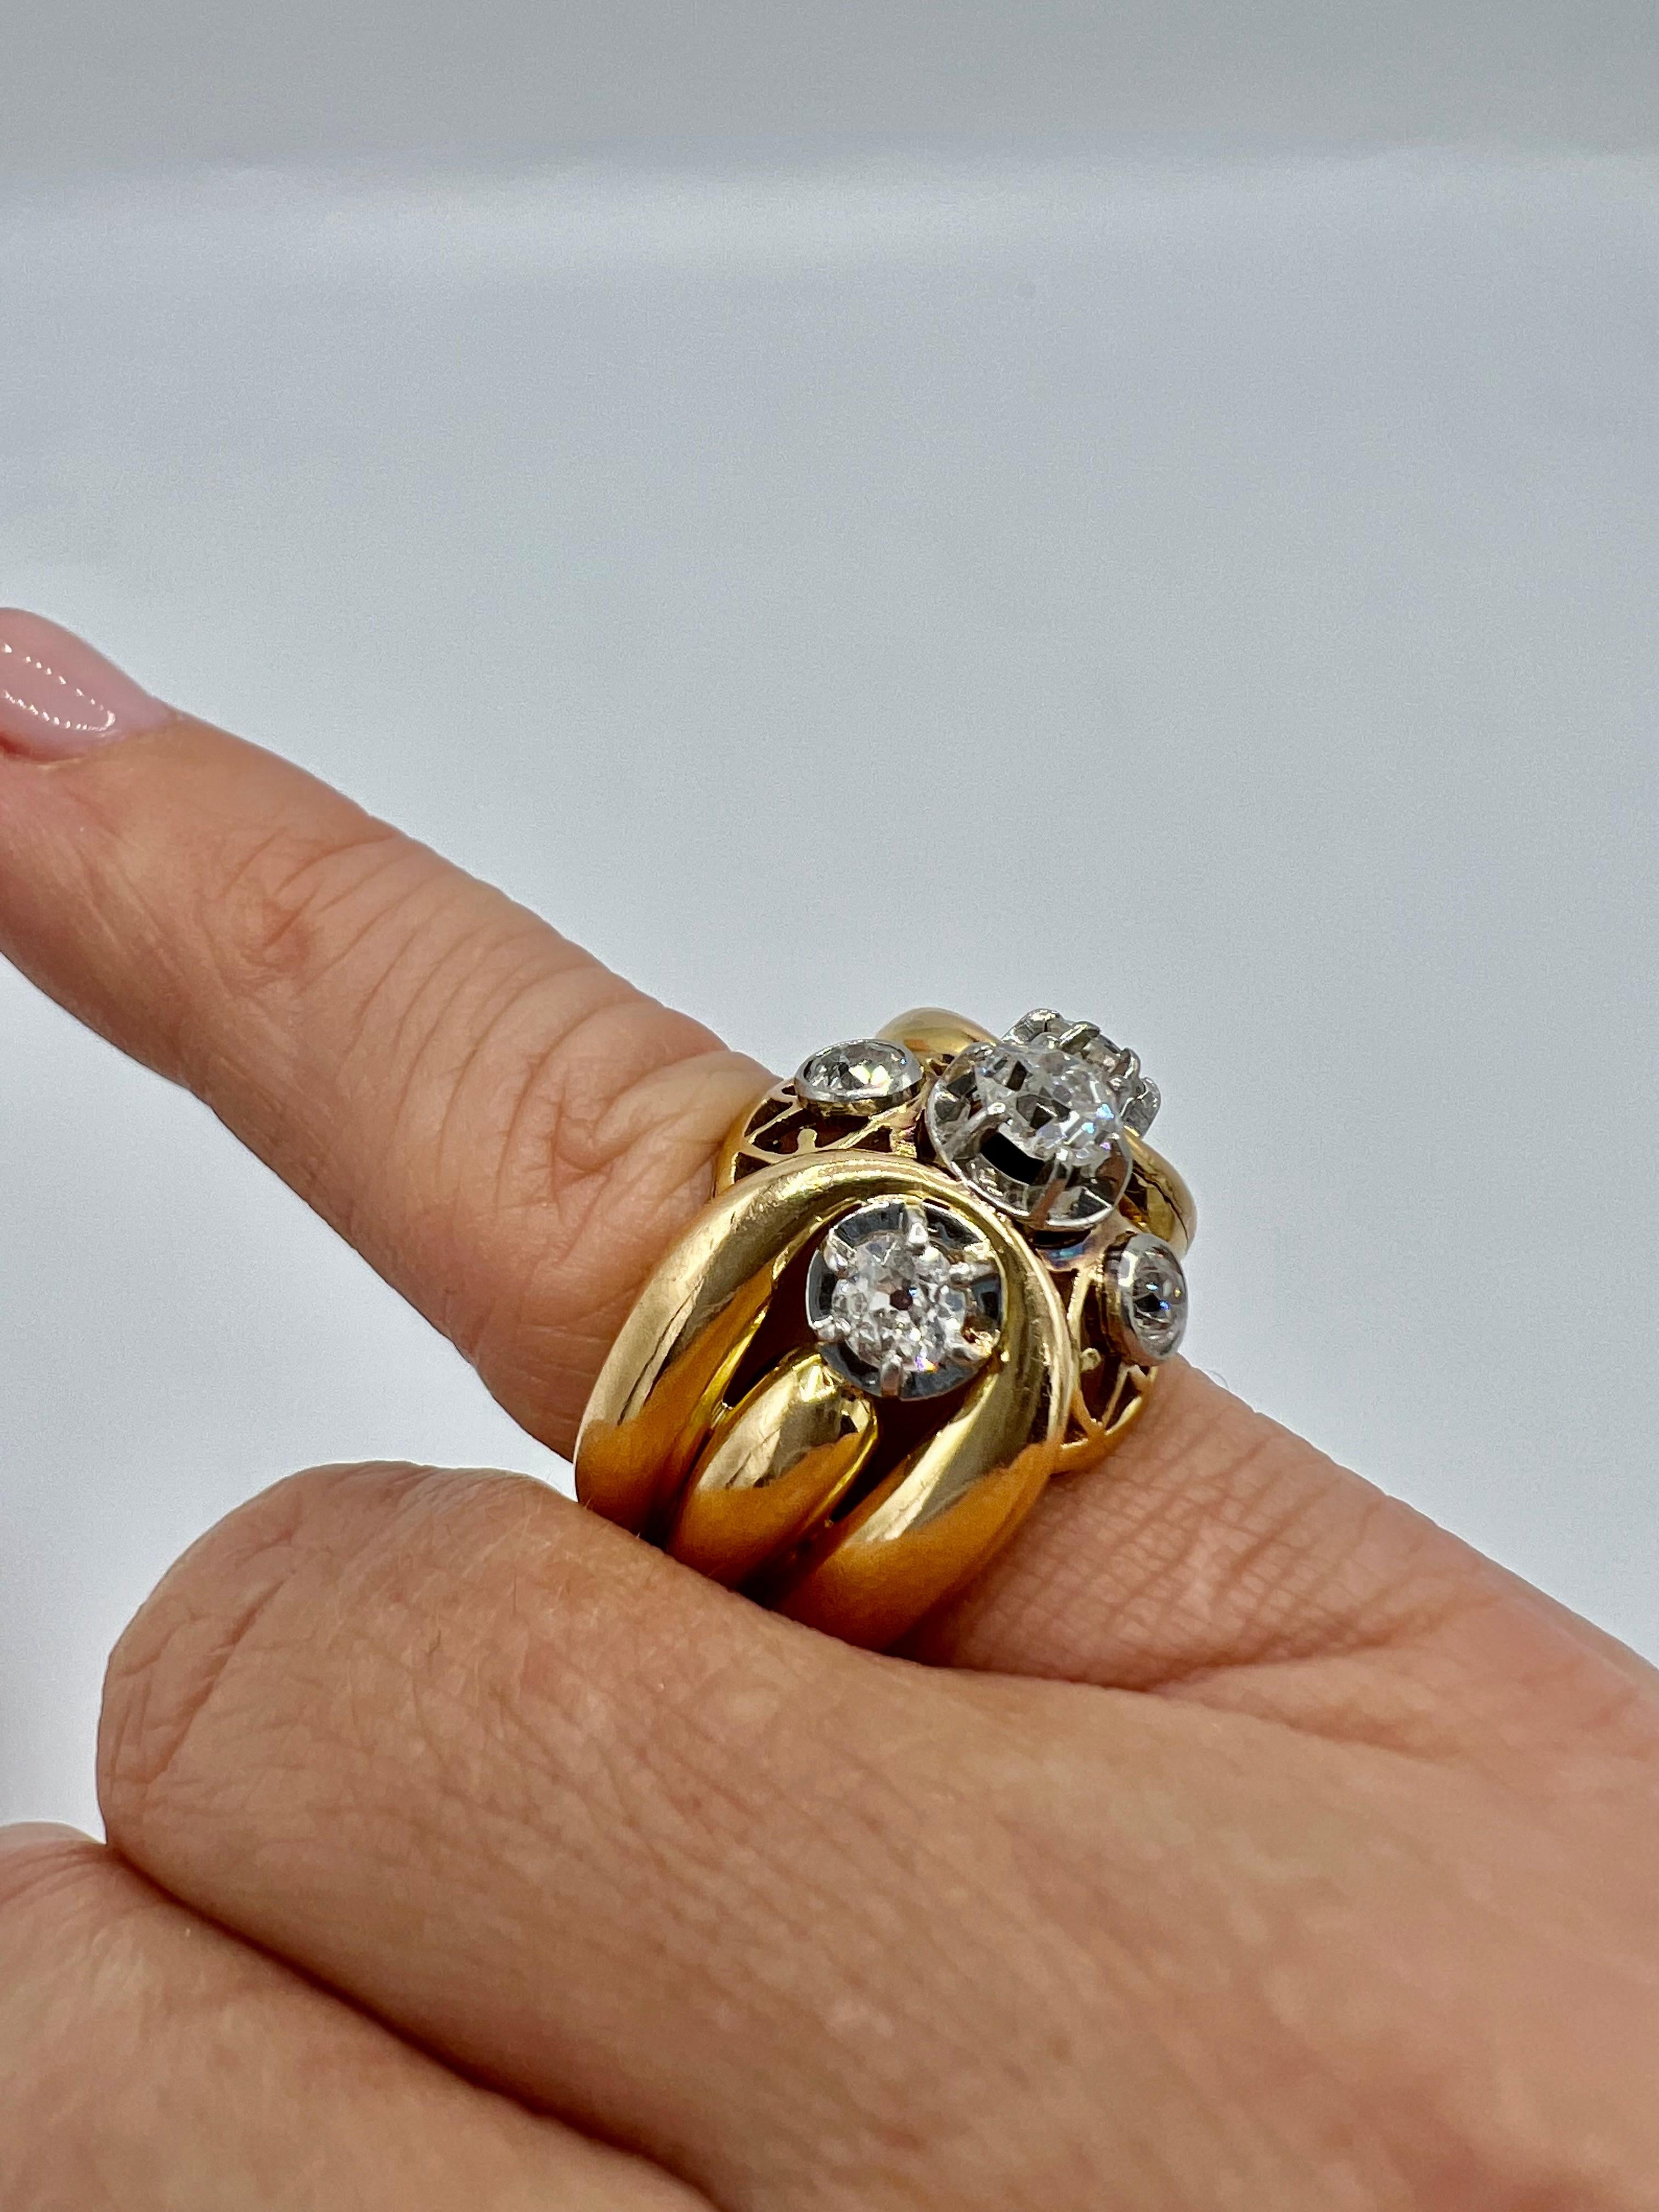 18 carat gold ring set with old cut diamonds,
1940/1950 period, named 